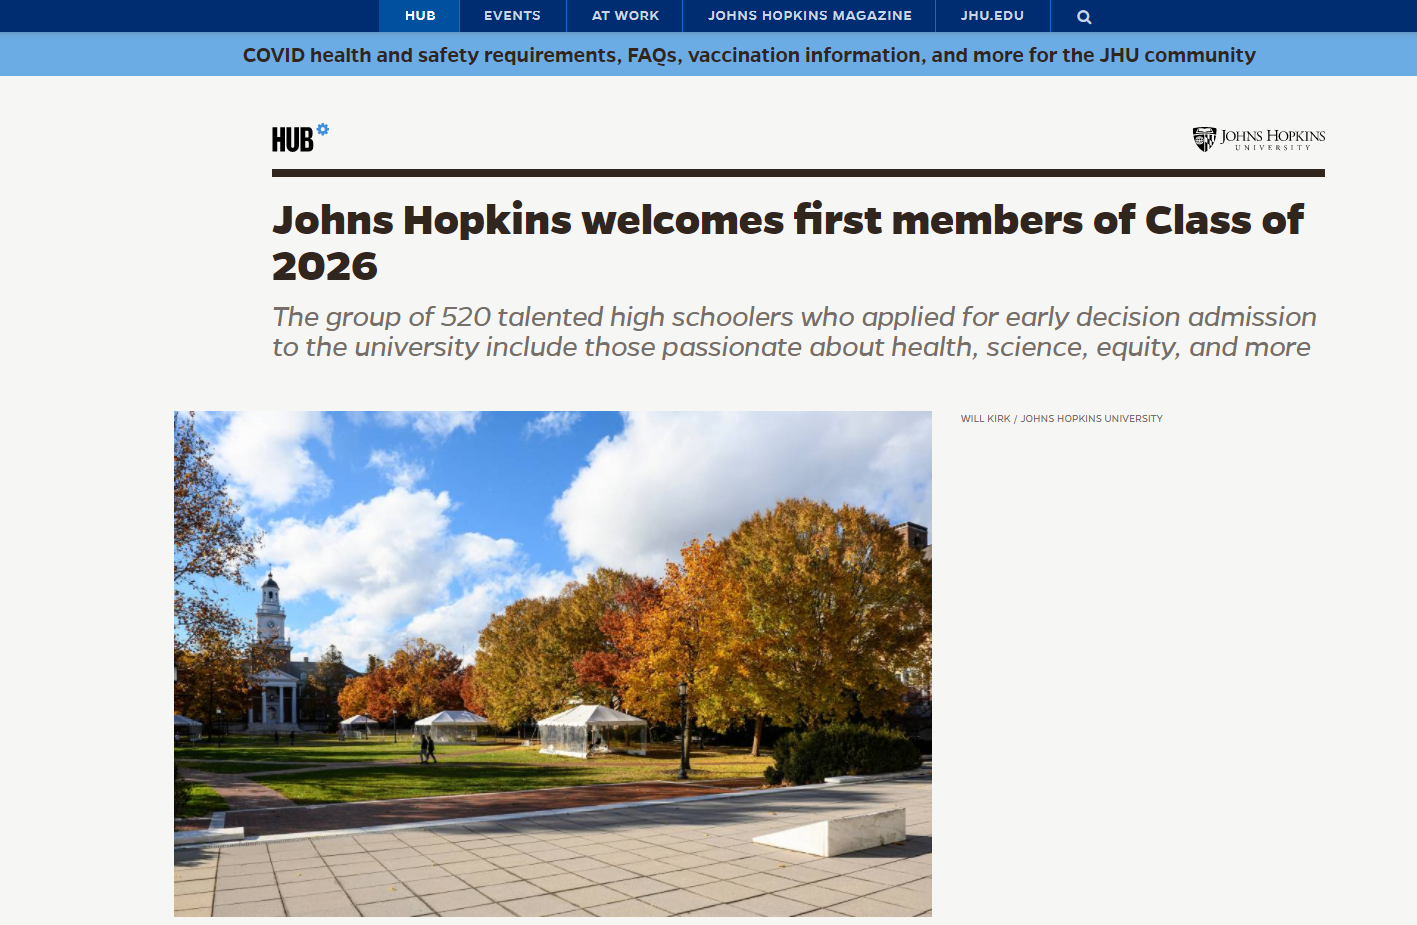 Johns Hopkins Admits 520 Early Decision I Applicants to Class of 2026